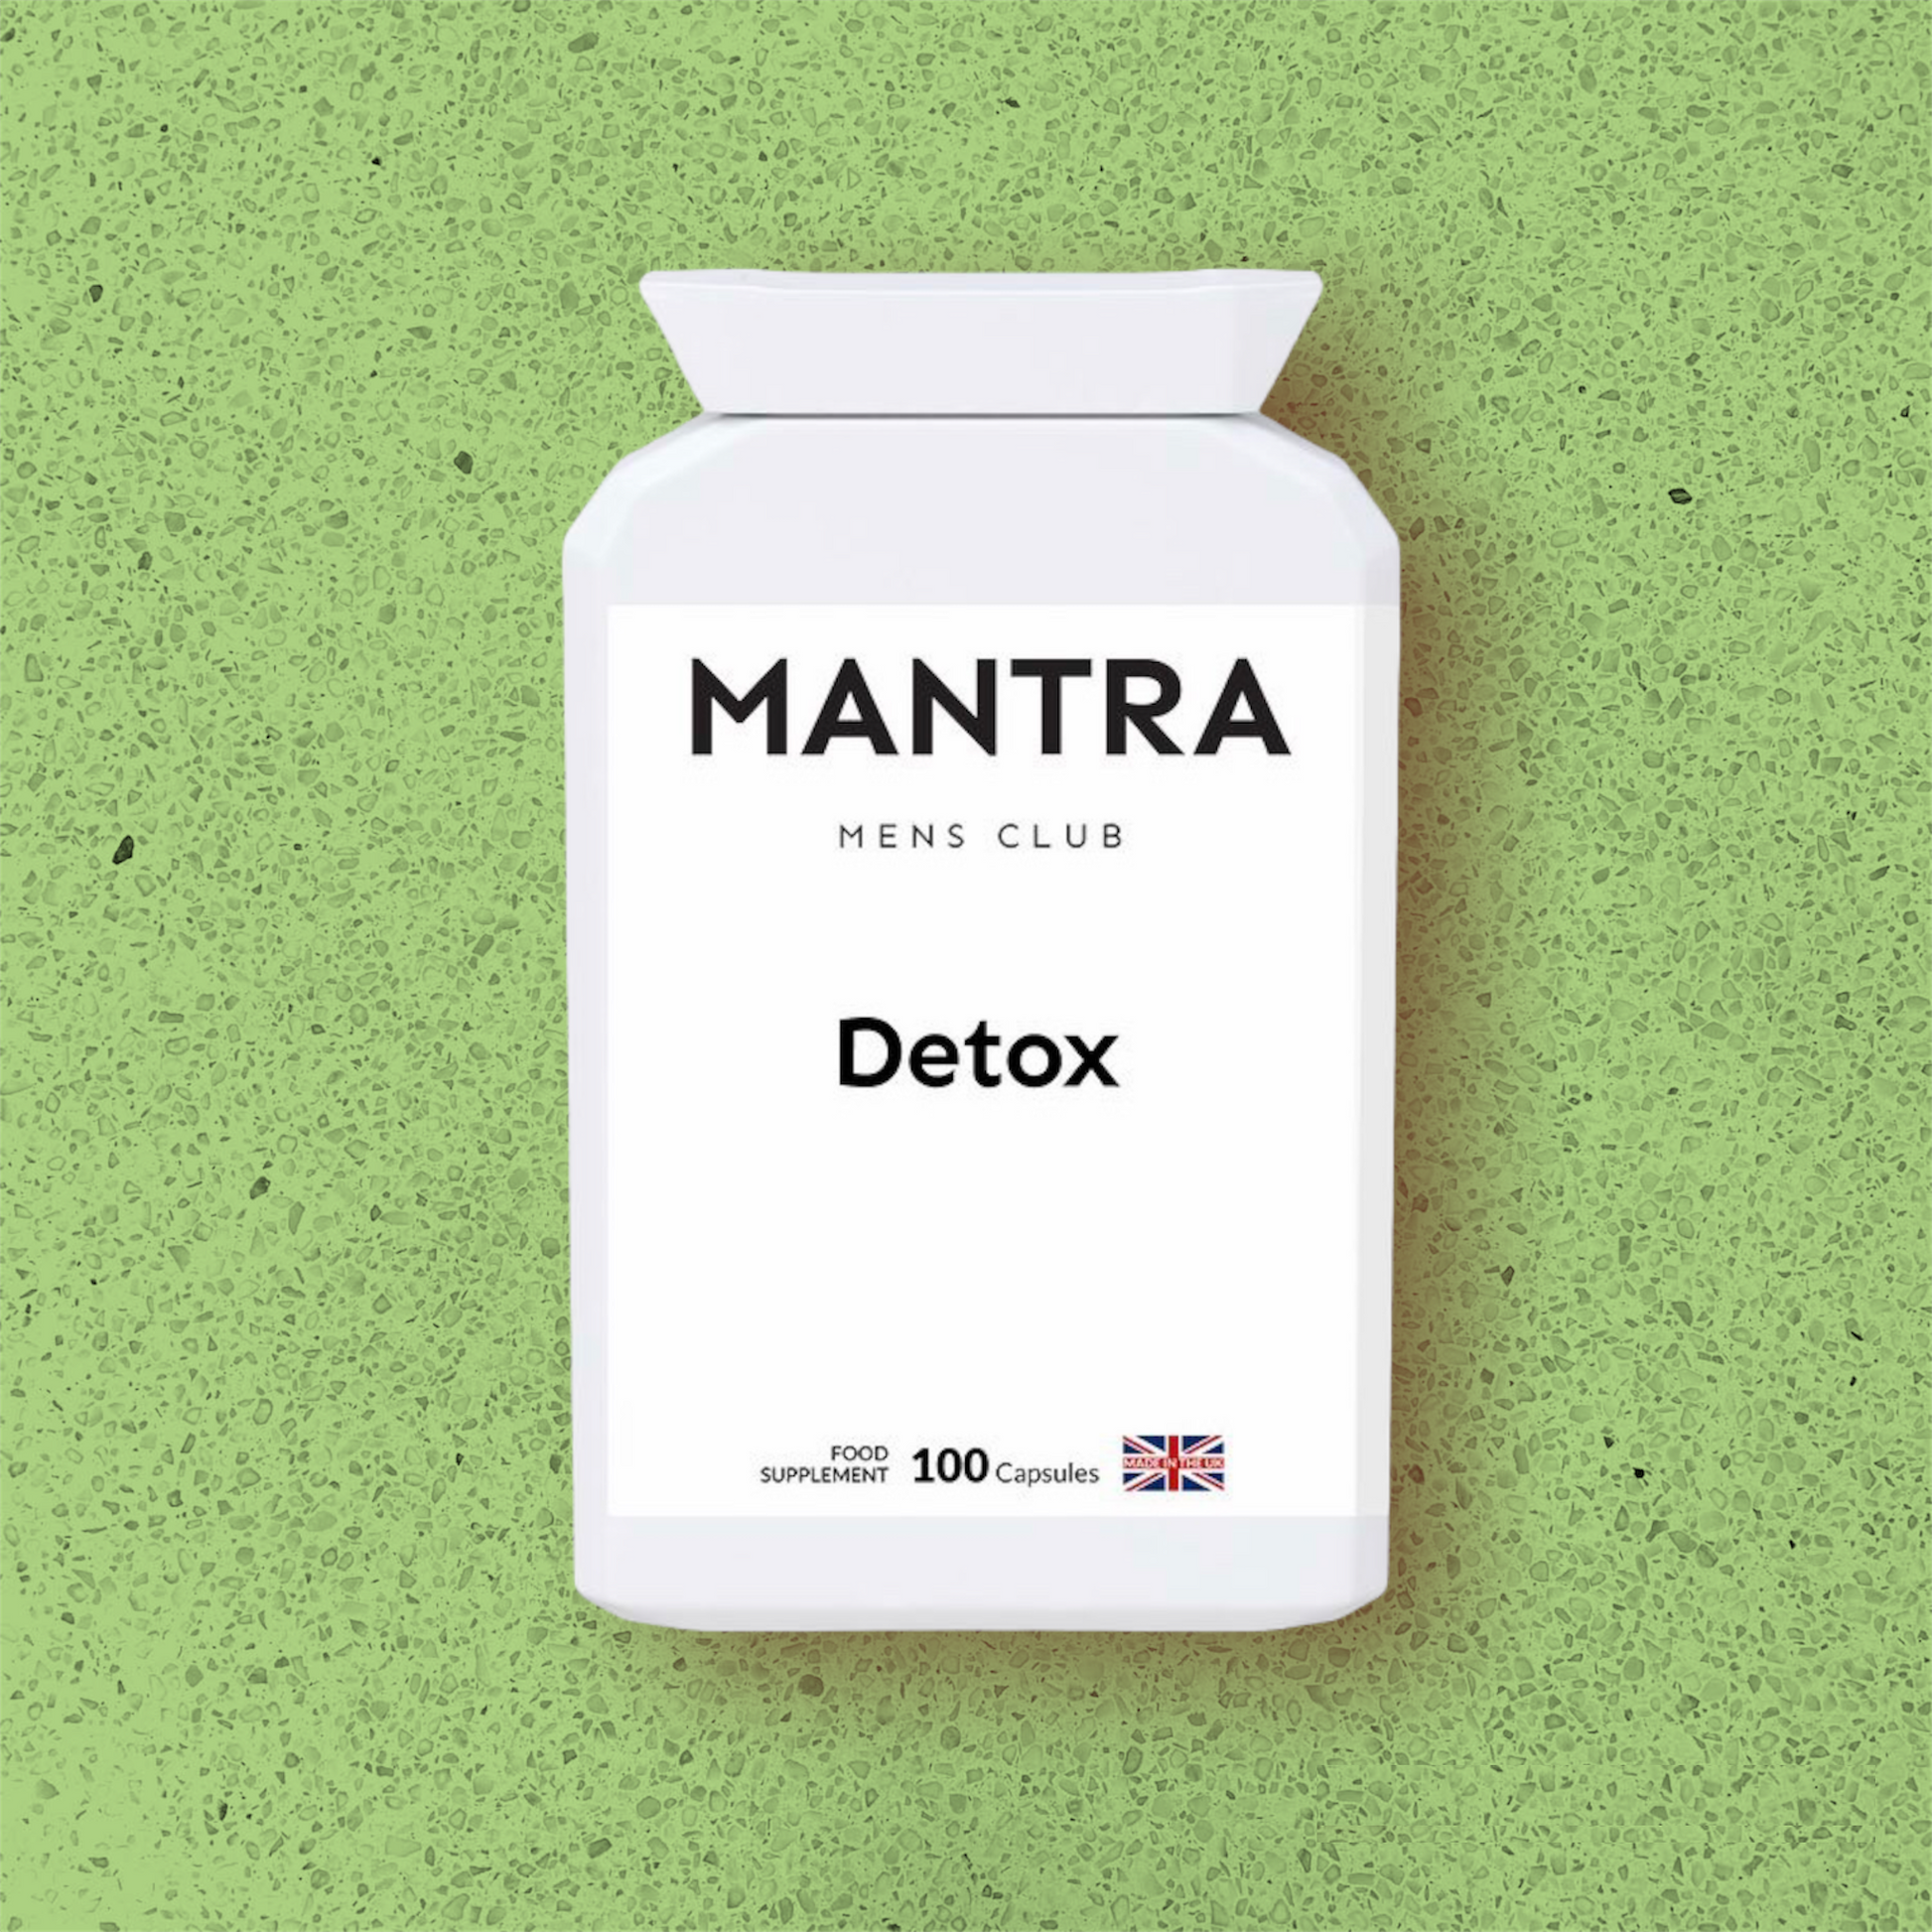 Mantra Men's Club Detox Cleanse for men. Men's wellness health and beauty. Iodine rich, thyroid, weightloss and metabolism. organic seaweed supplements for men